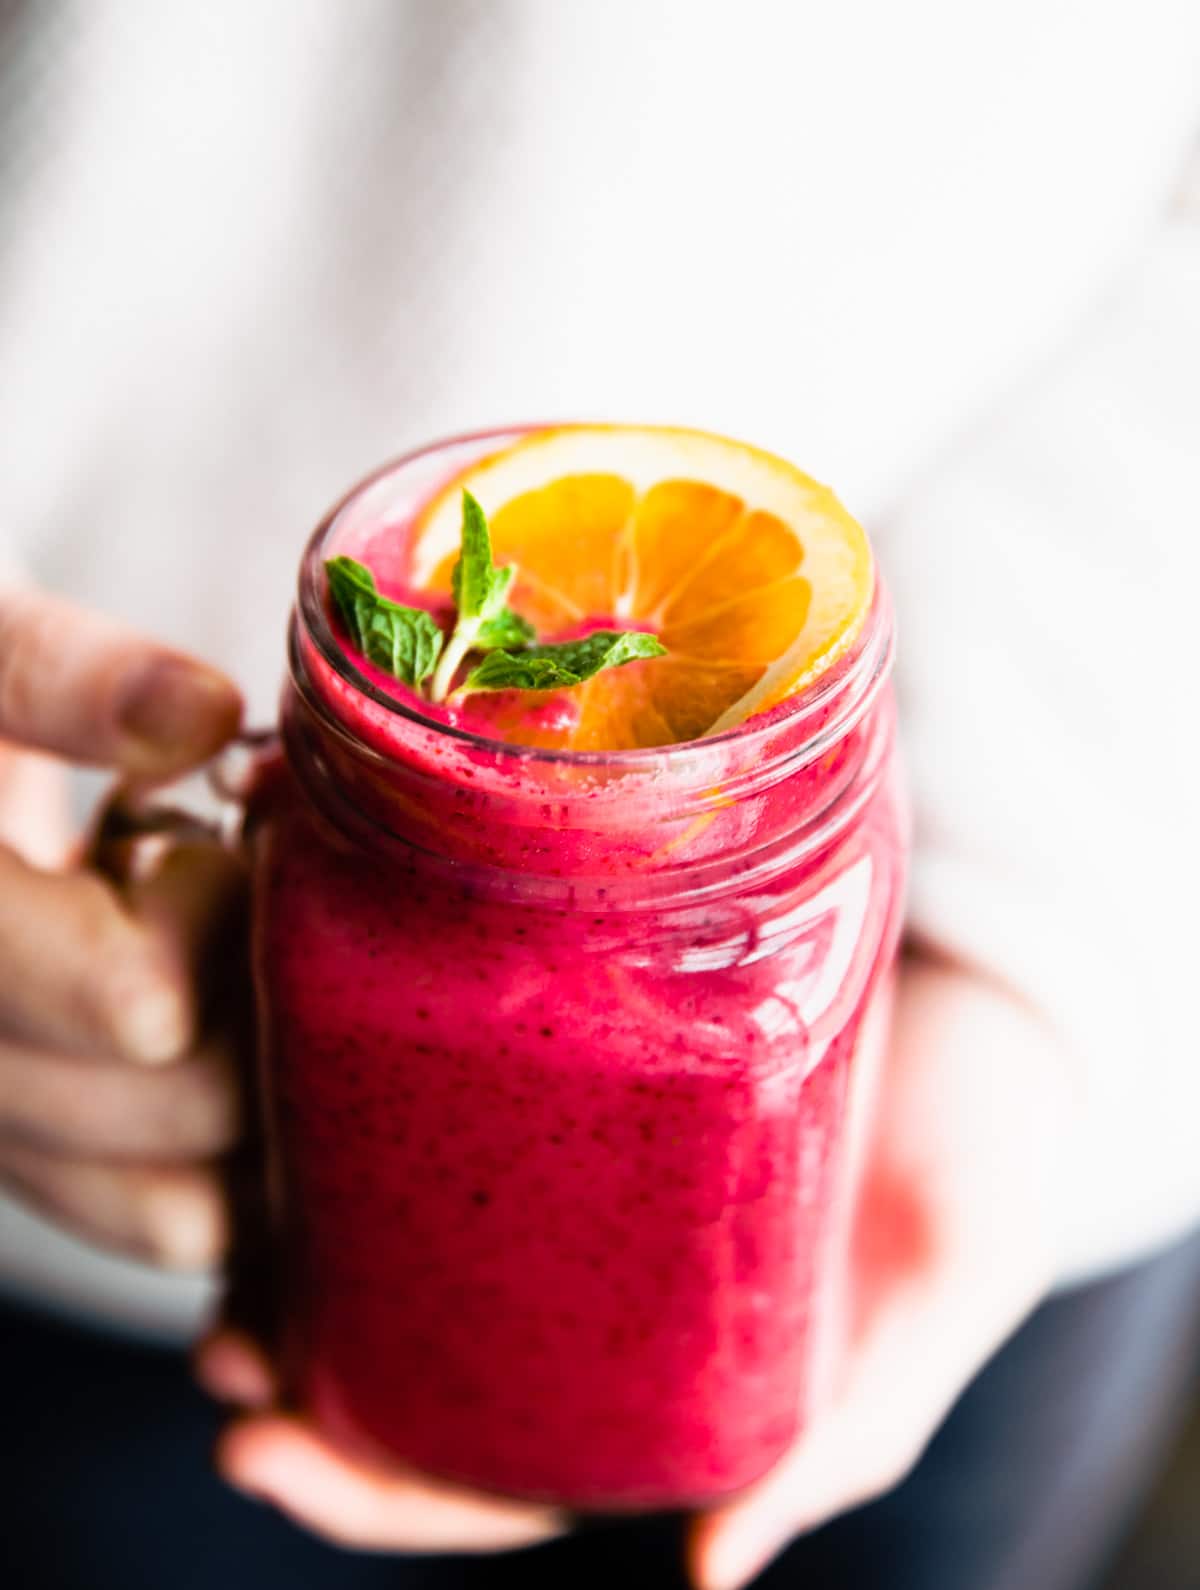 A hand holding a glass cup with handle filled with bright pink immunity boosting frozen fruit smoothie